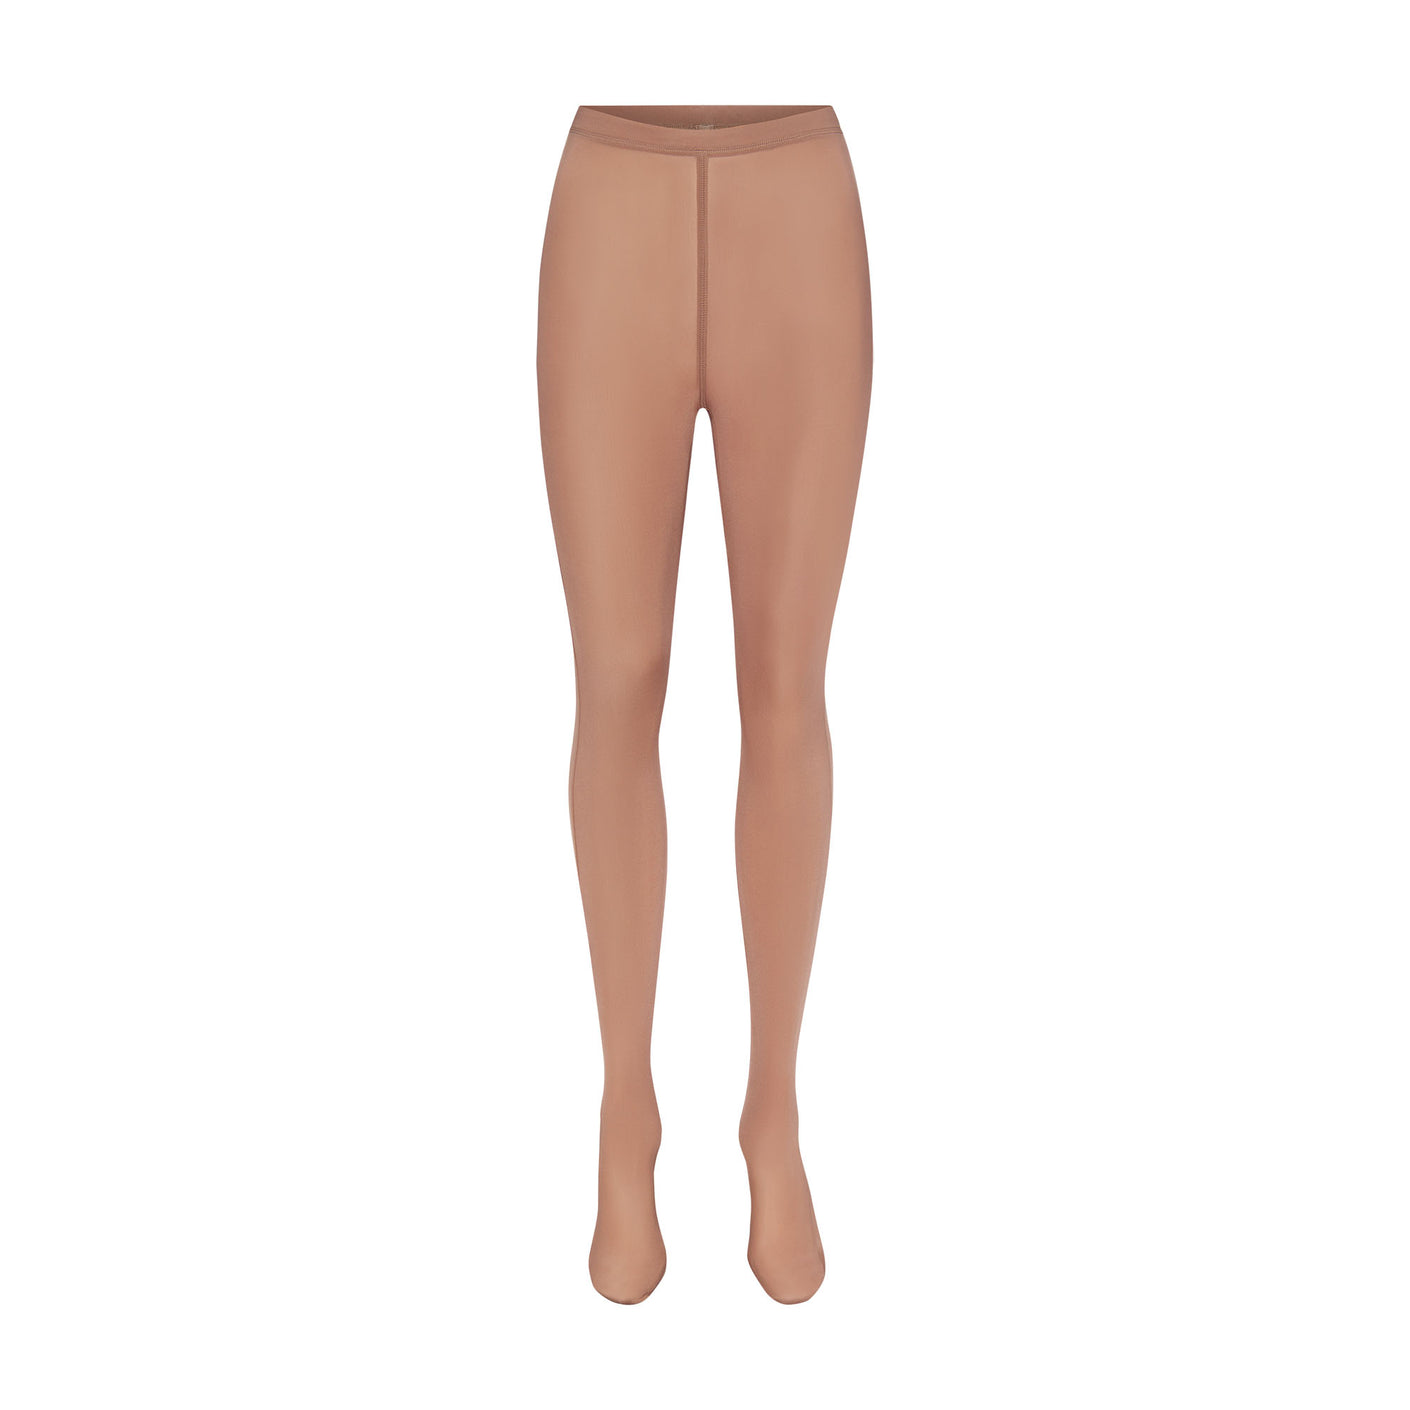 Jelly Sheer Footed Legging - Sienna | SKIMS